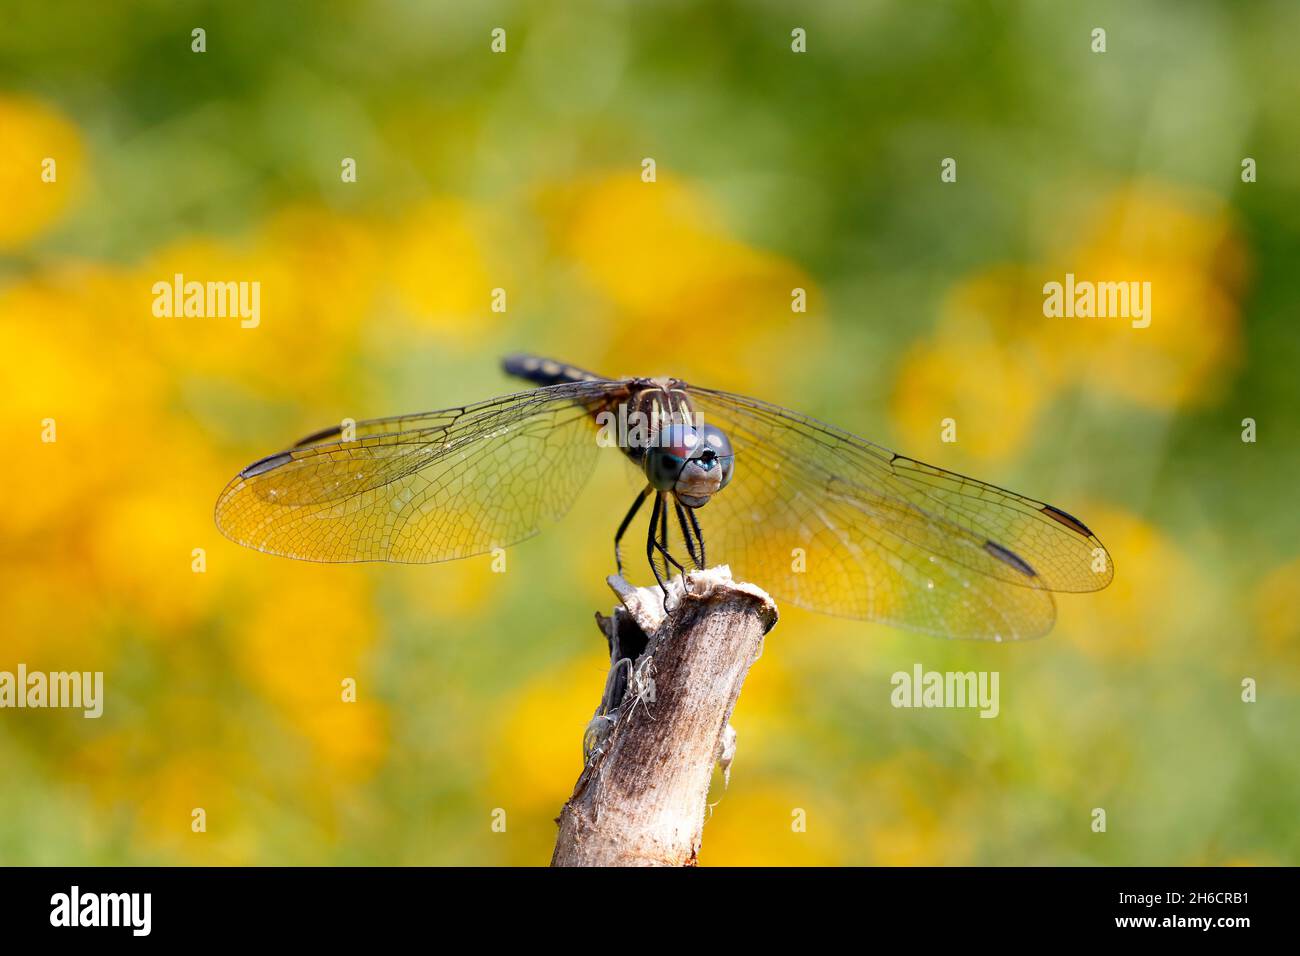 A male Blue Dasher dragonfly (Pachydiplax longipennis) perched on a branch top waiting for prey to come in range. Stock Photo